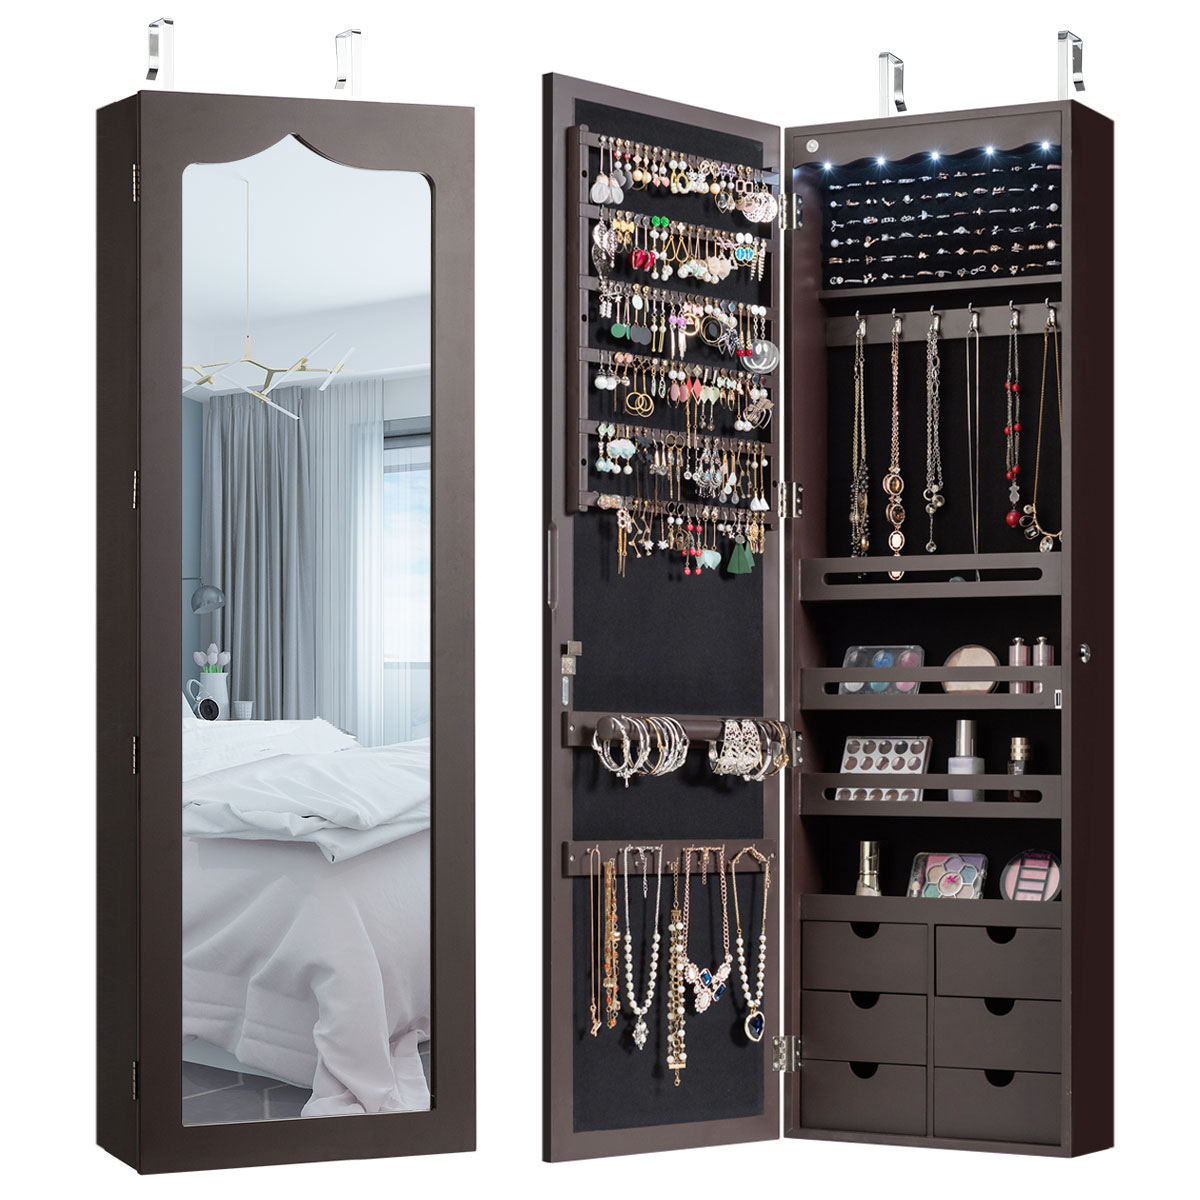 Costway Wall Door Mounted LED Mirror Jewelry Cabinet Lockable Armoire w/ 6 Drawers Brown